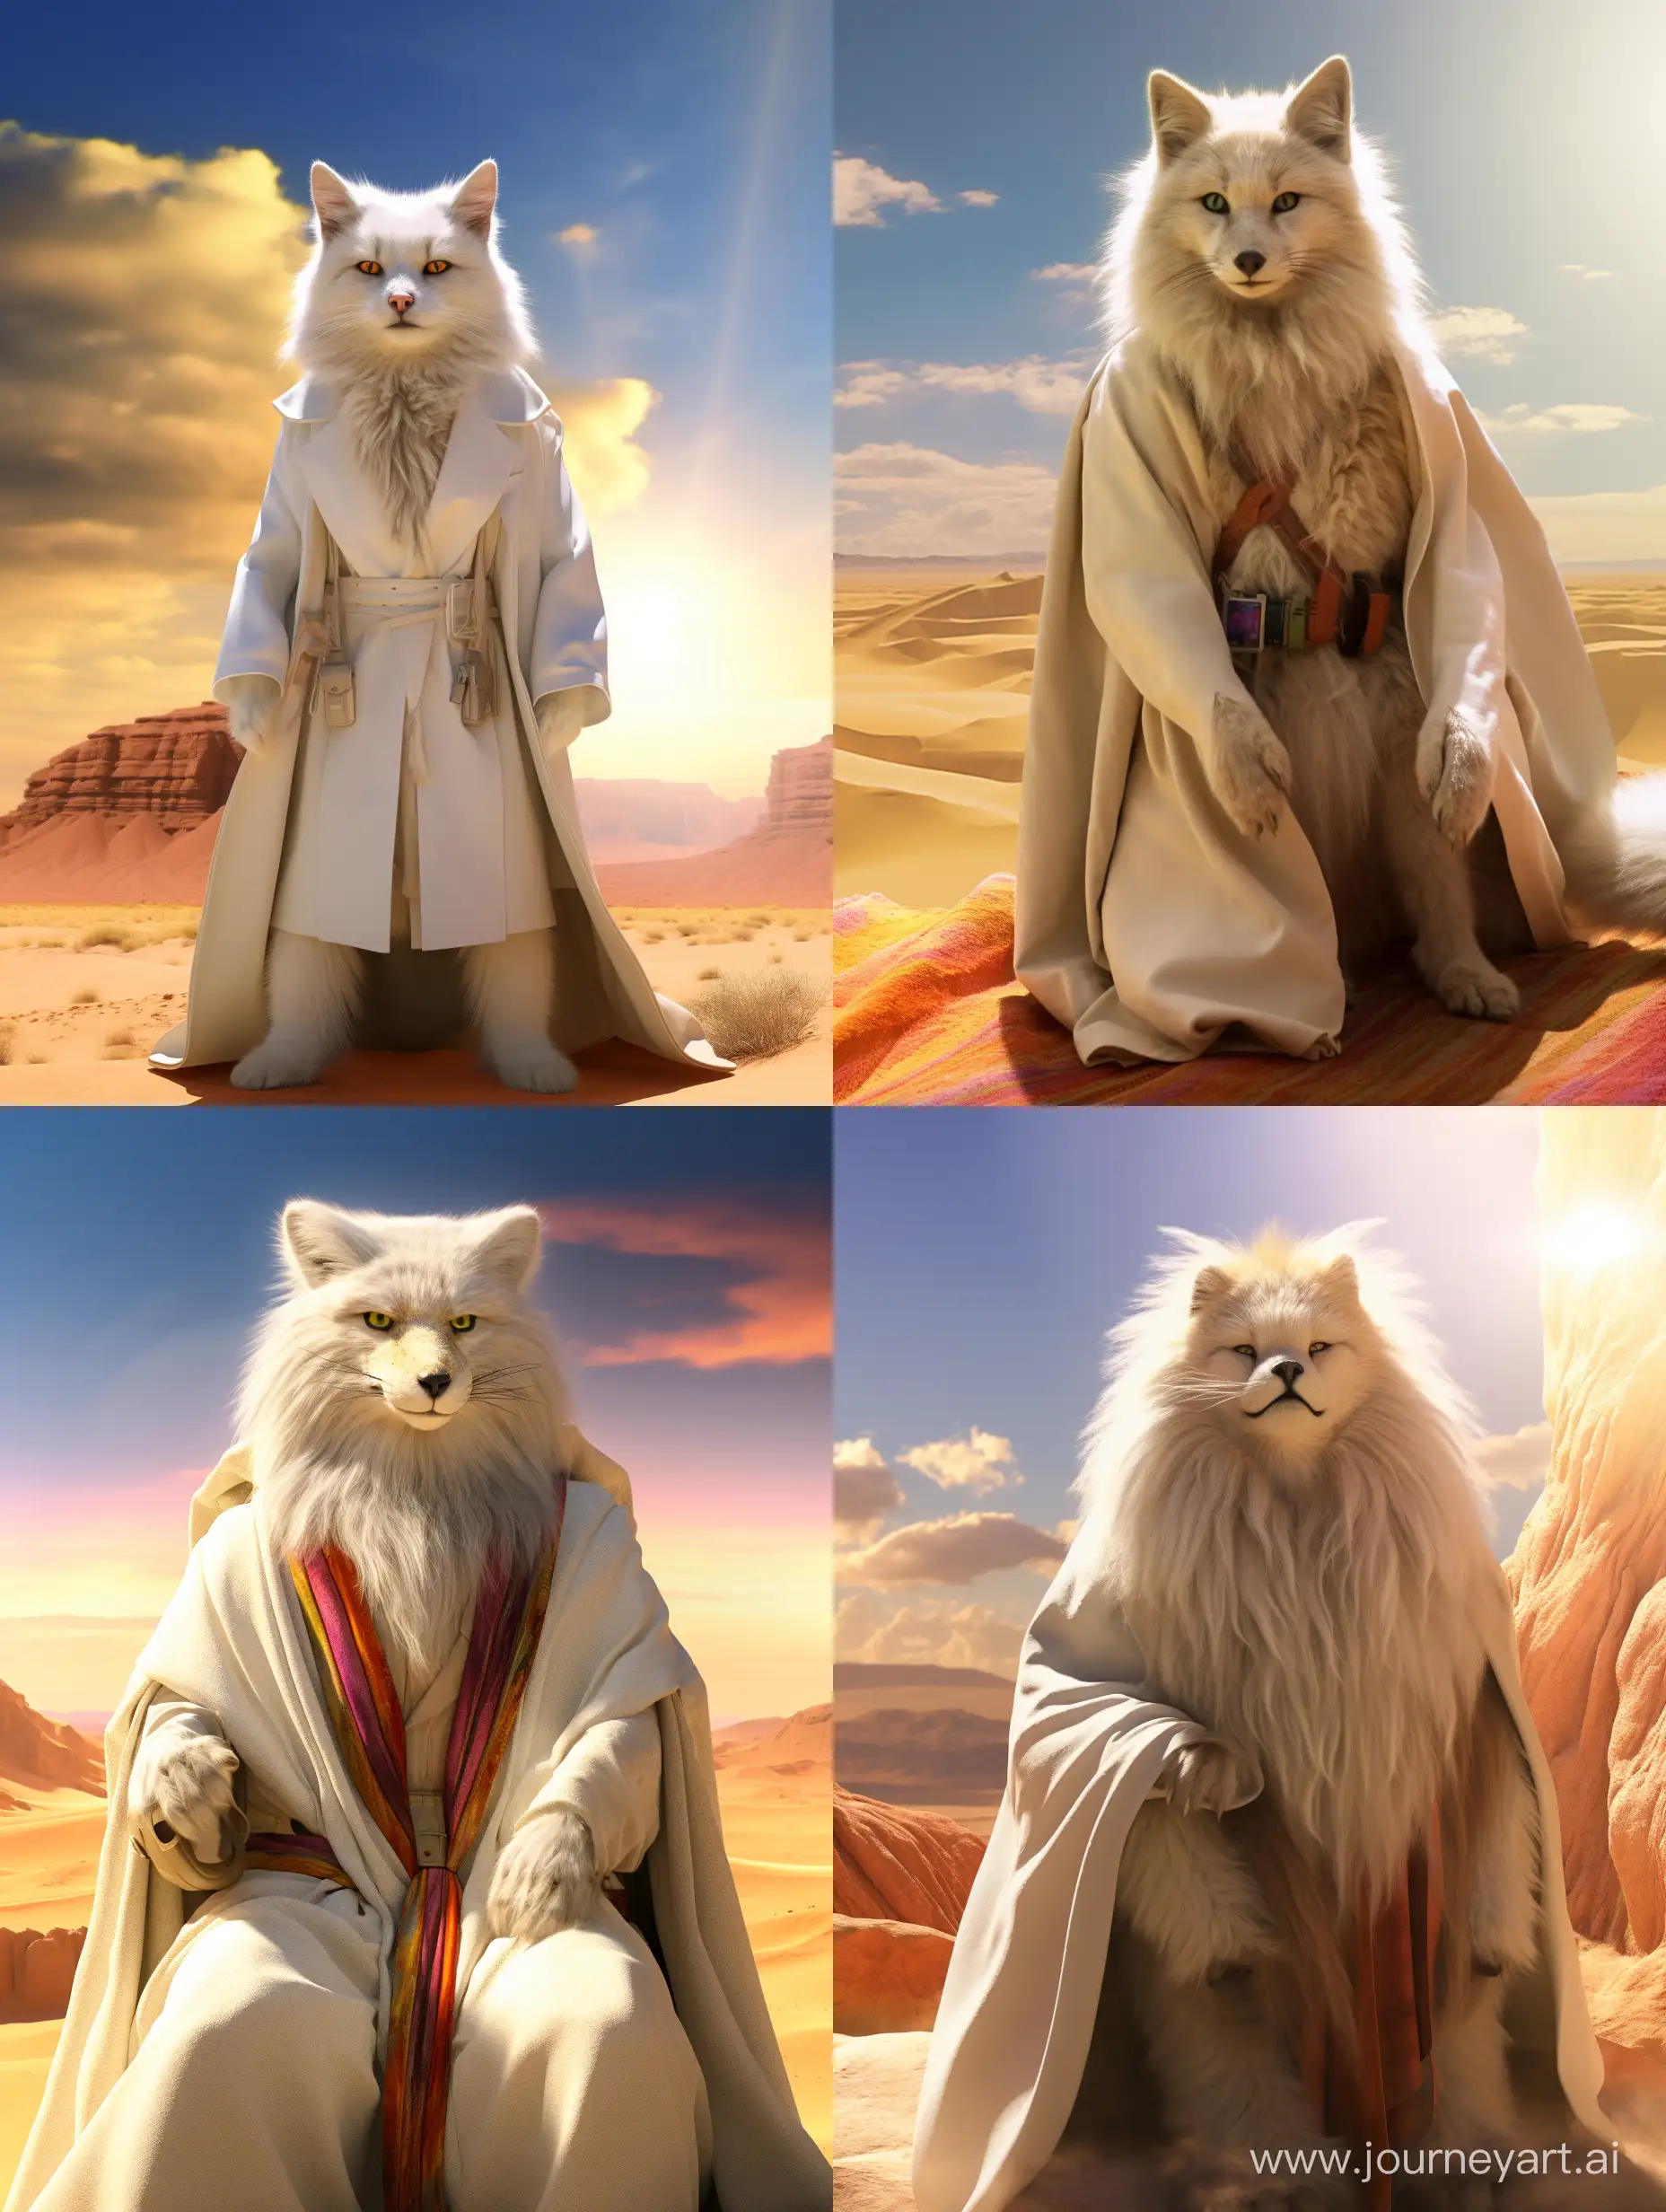 Epic-Realism-Hyperdetailed-Monster-Fox-in-White-Long-Coat-Amidst-Desert-Sunlight-with-8K-Resolution-and-Rainbow-Backdrop